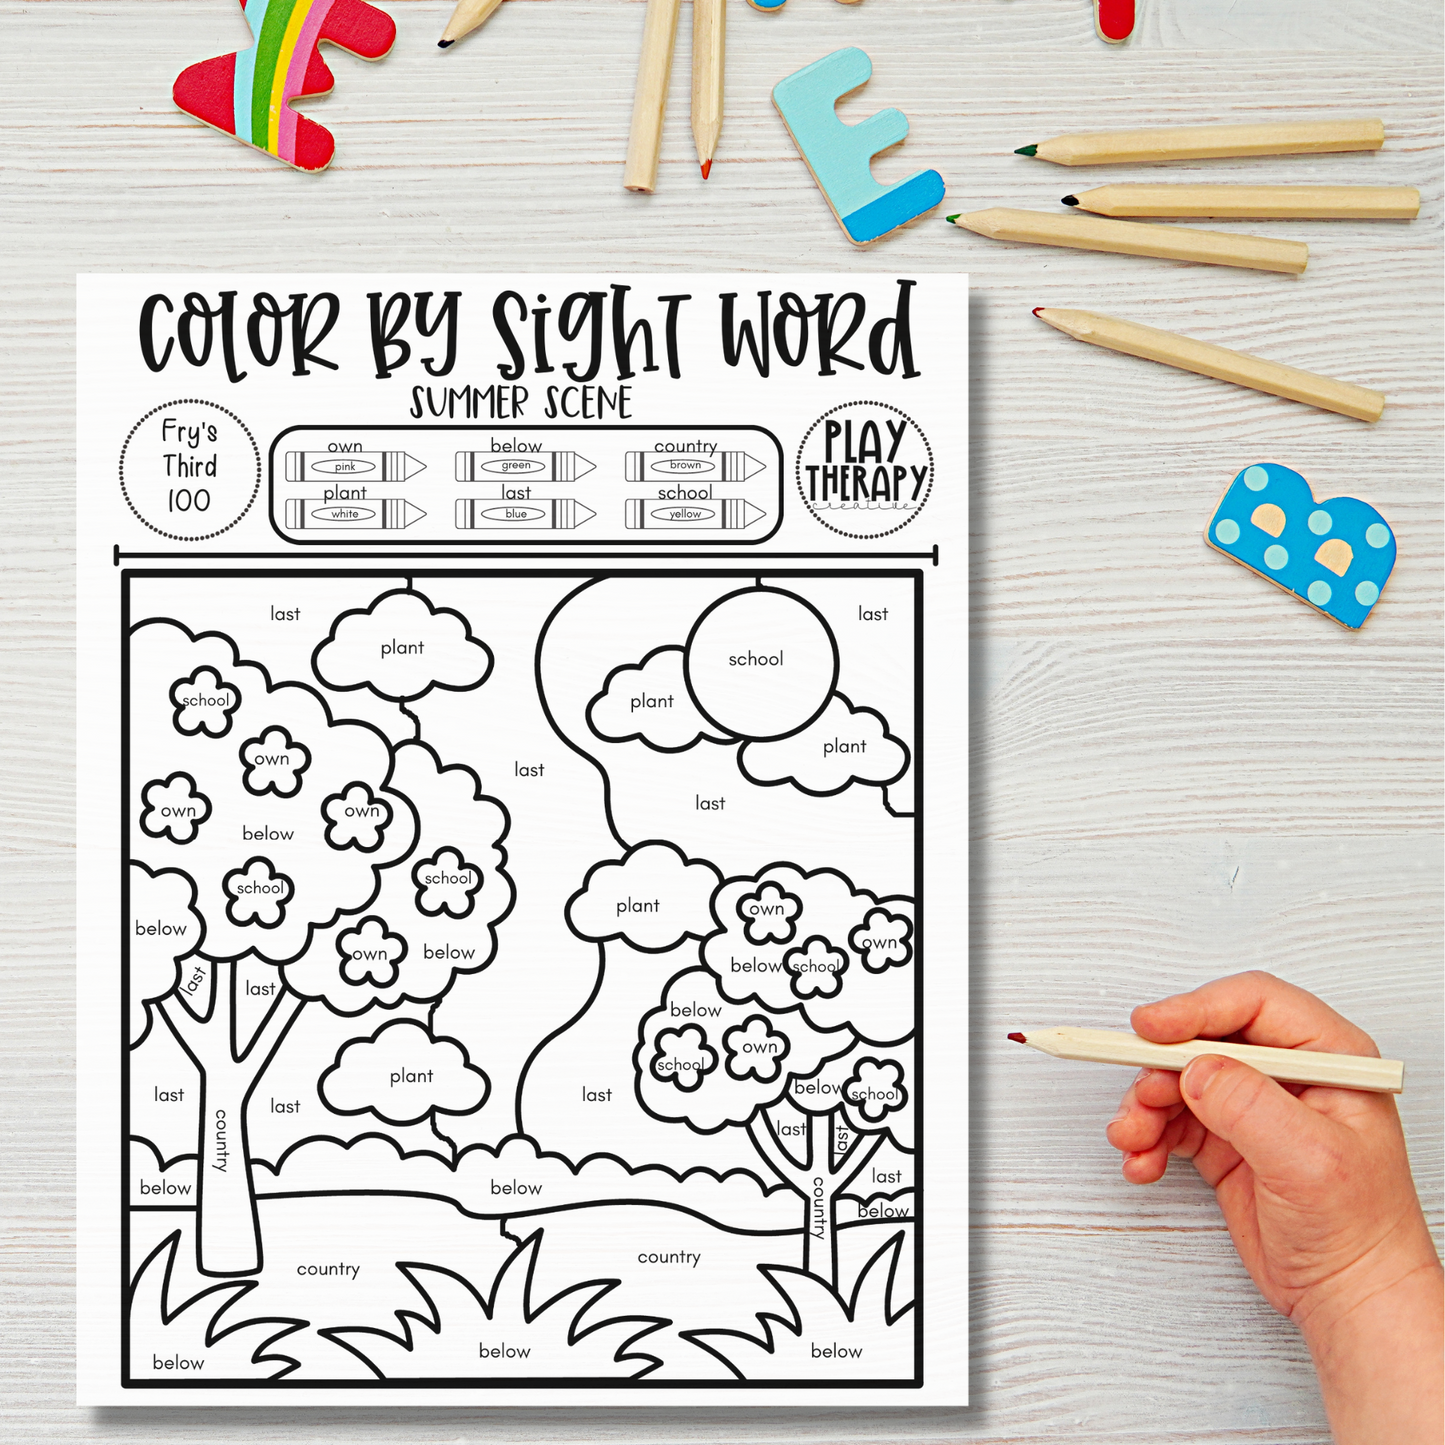 Fry's Third 100 Color-by-Sight-Word Coloring Page Practice Sheets - Summer Theme